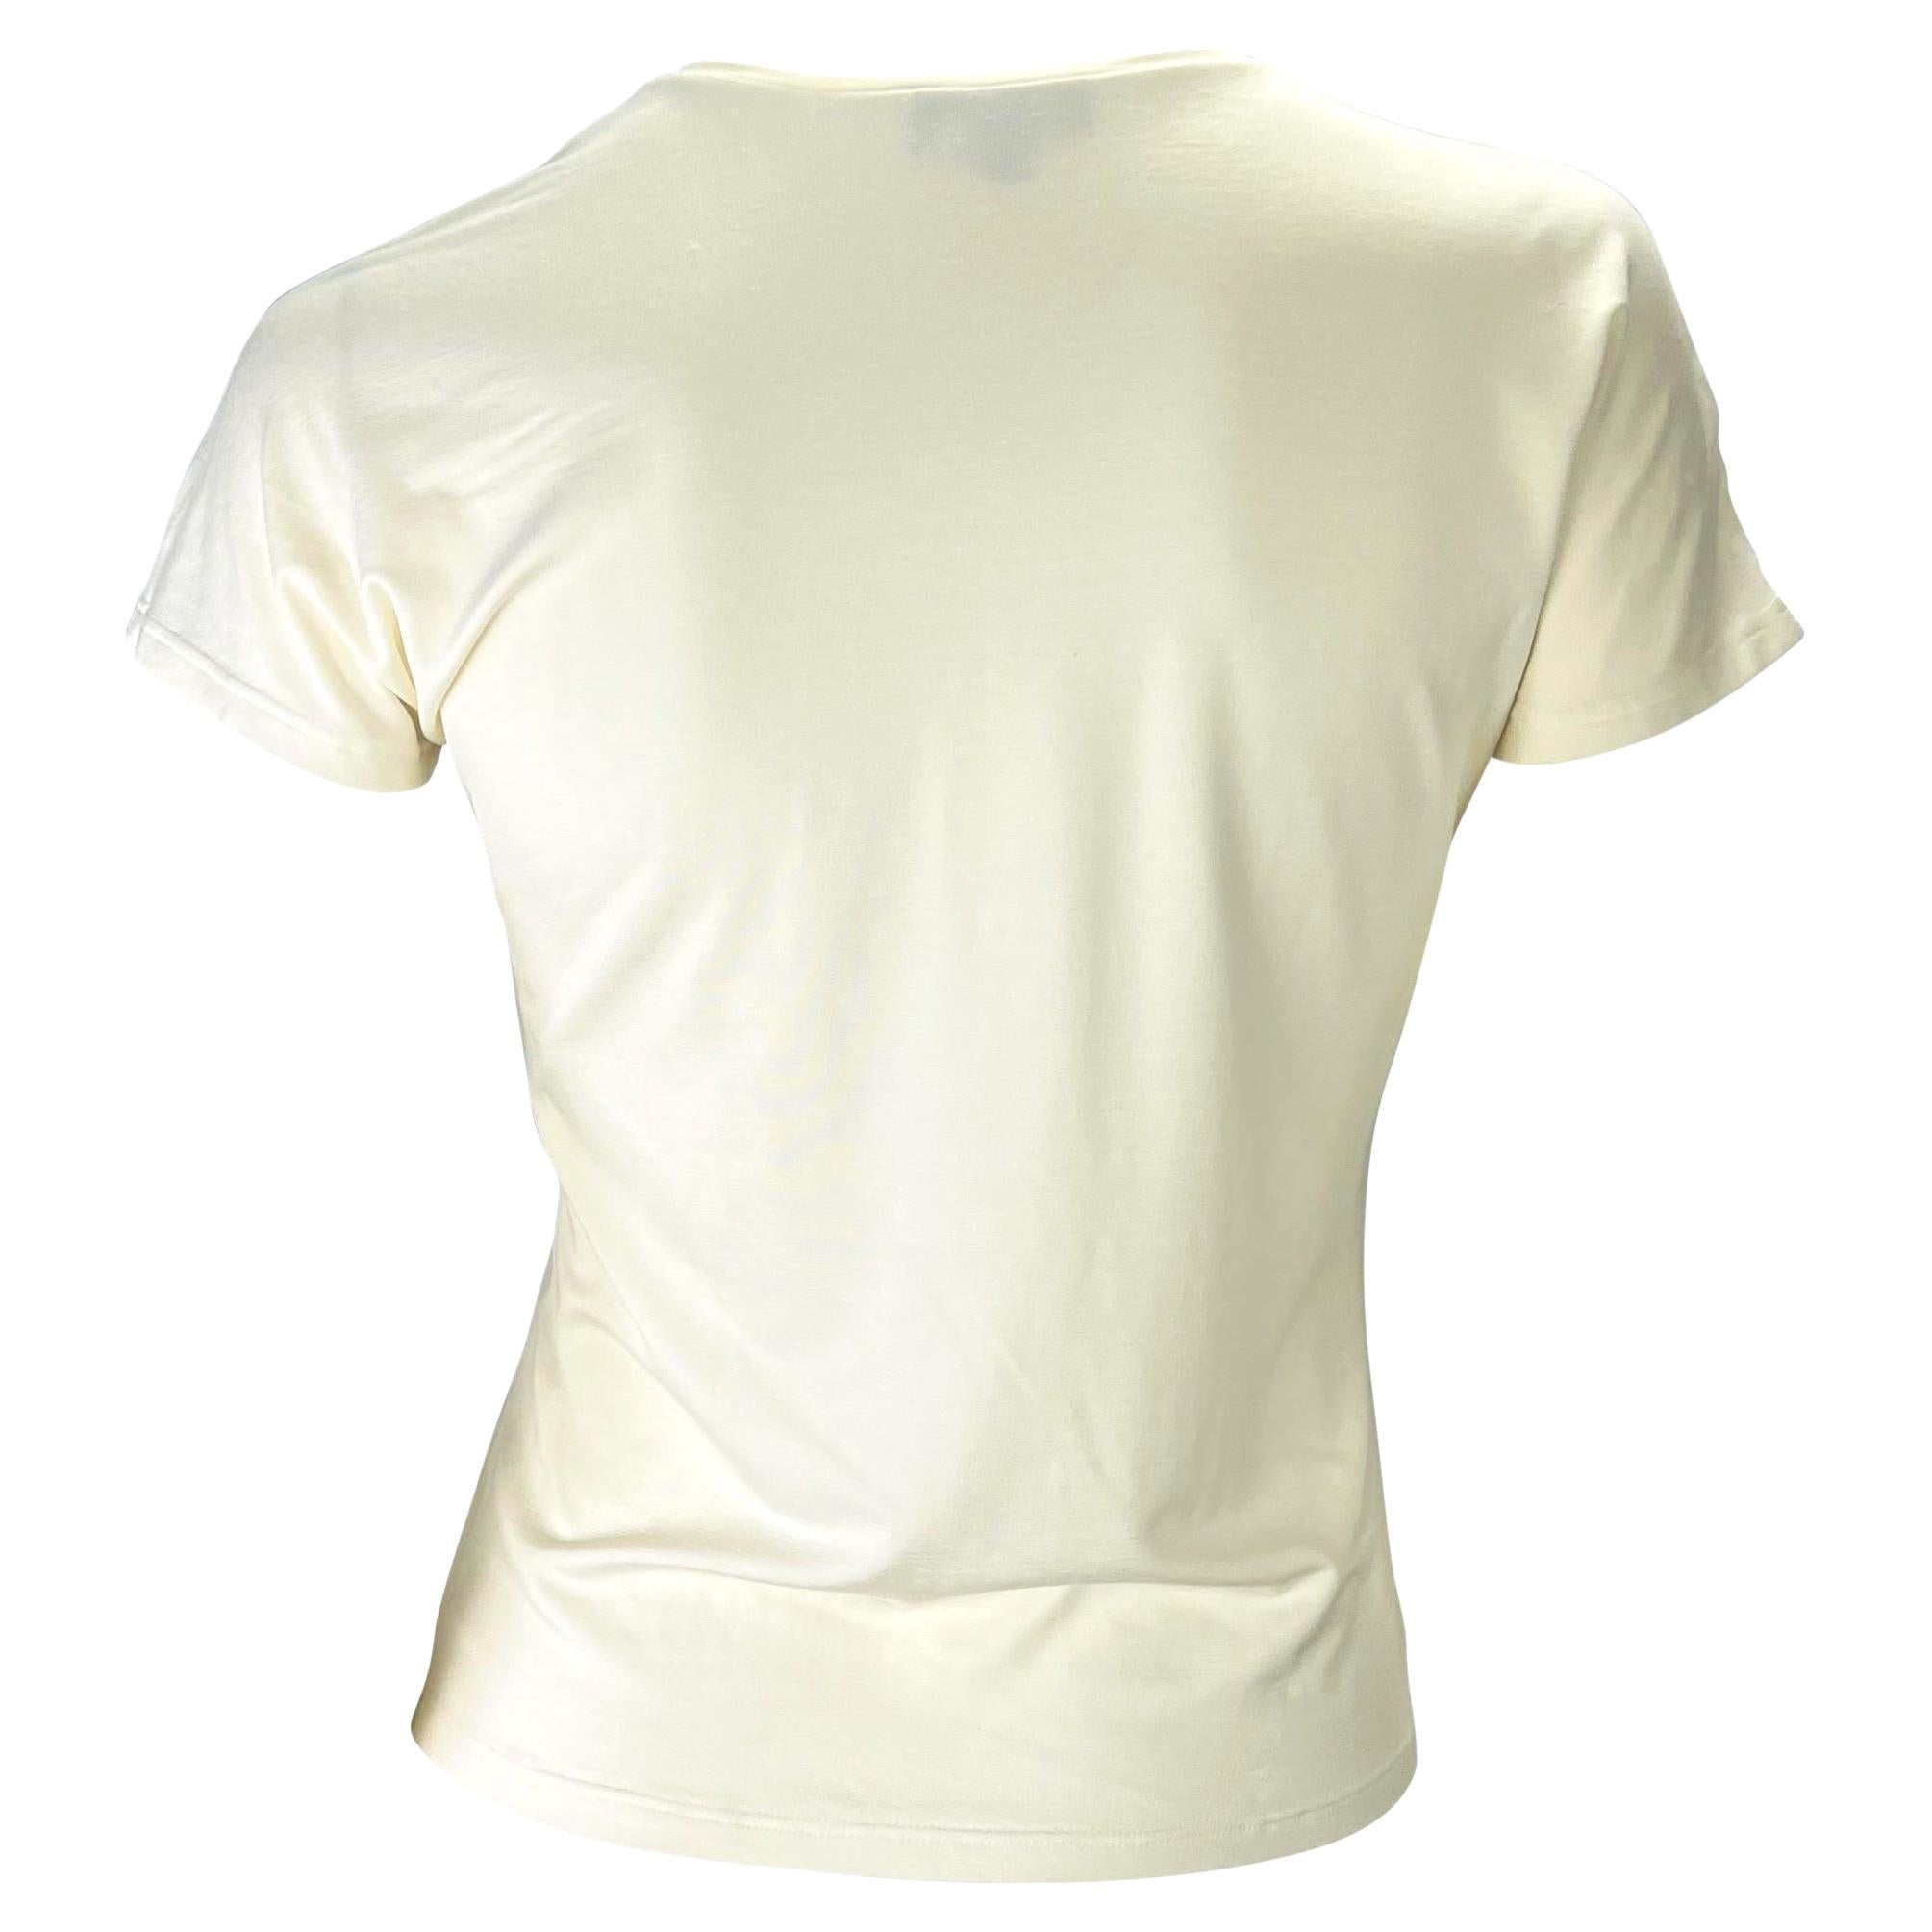 S/S 1997 Gucci for Gucci White Stretch V-Neck Tapered T-Shirt (Weiß) im Angebot